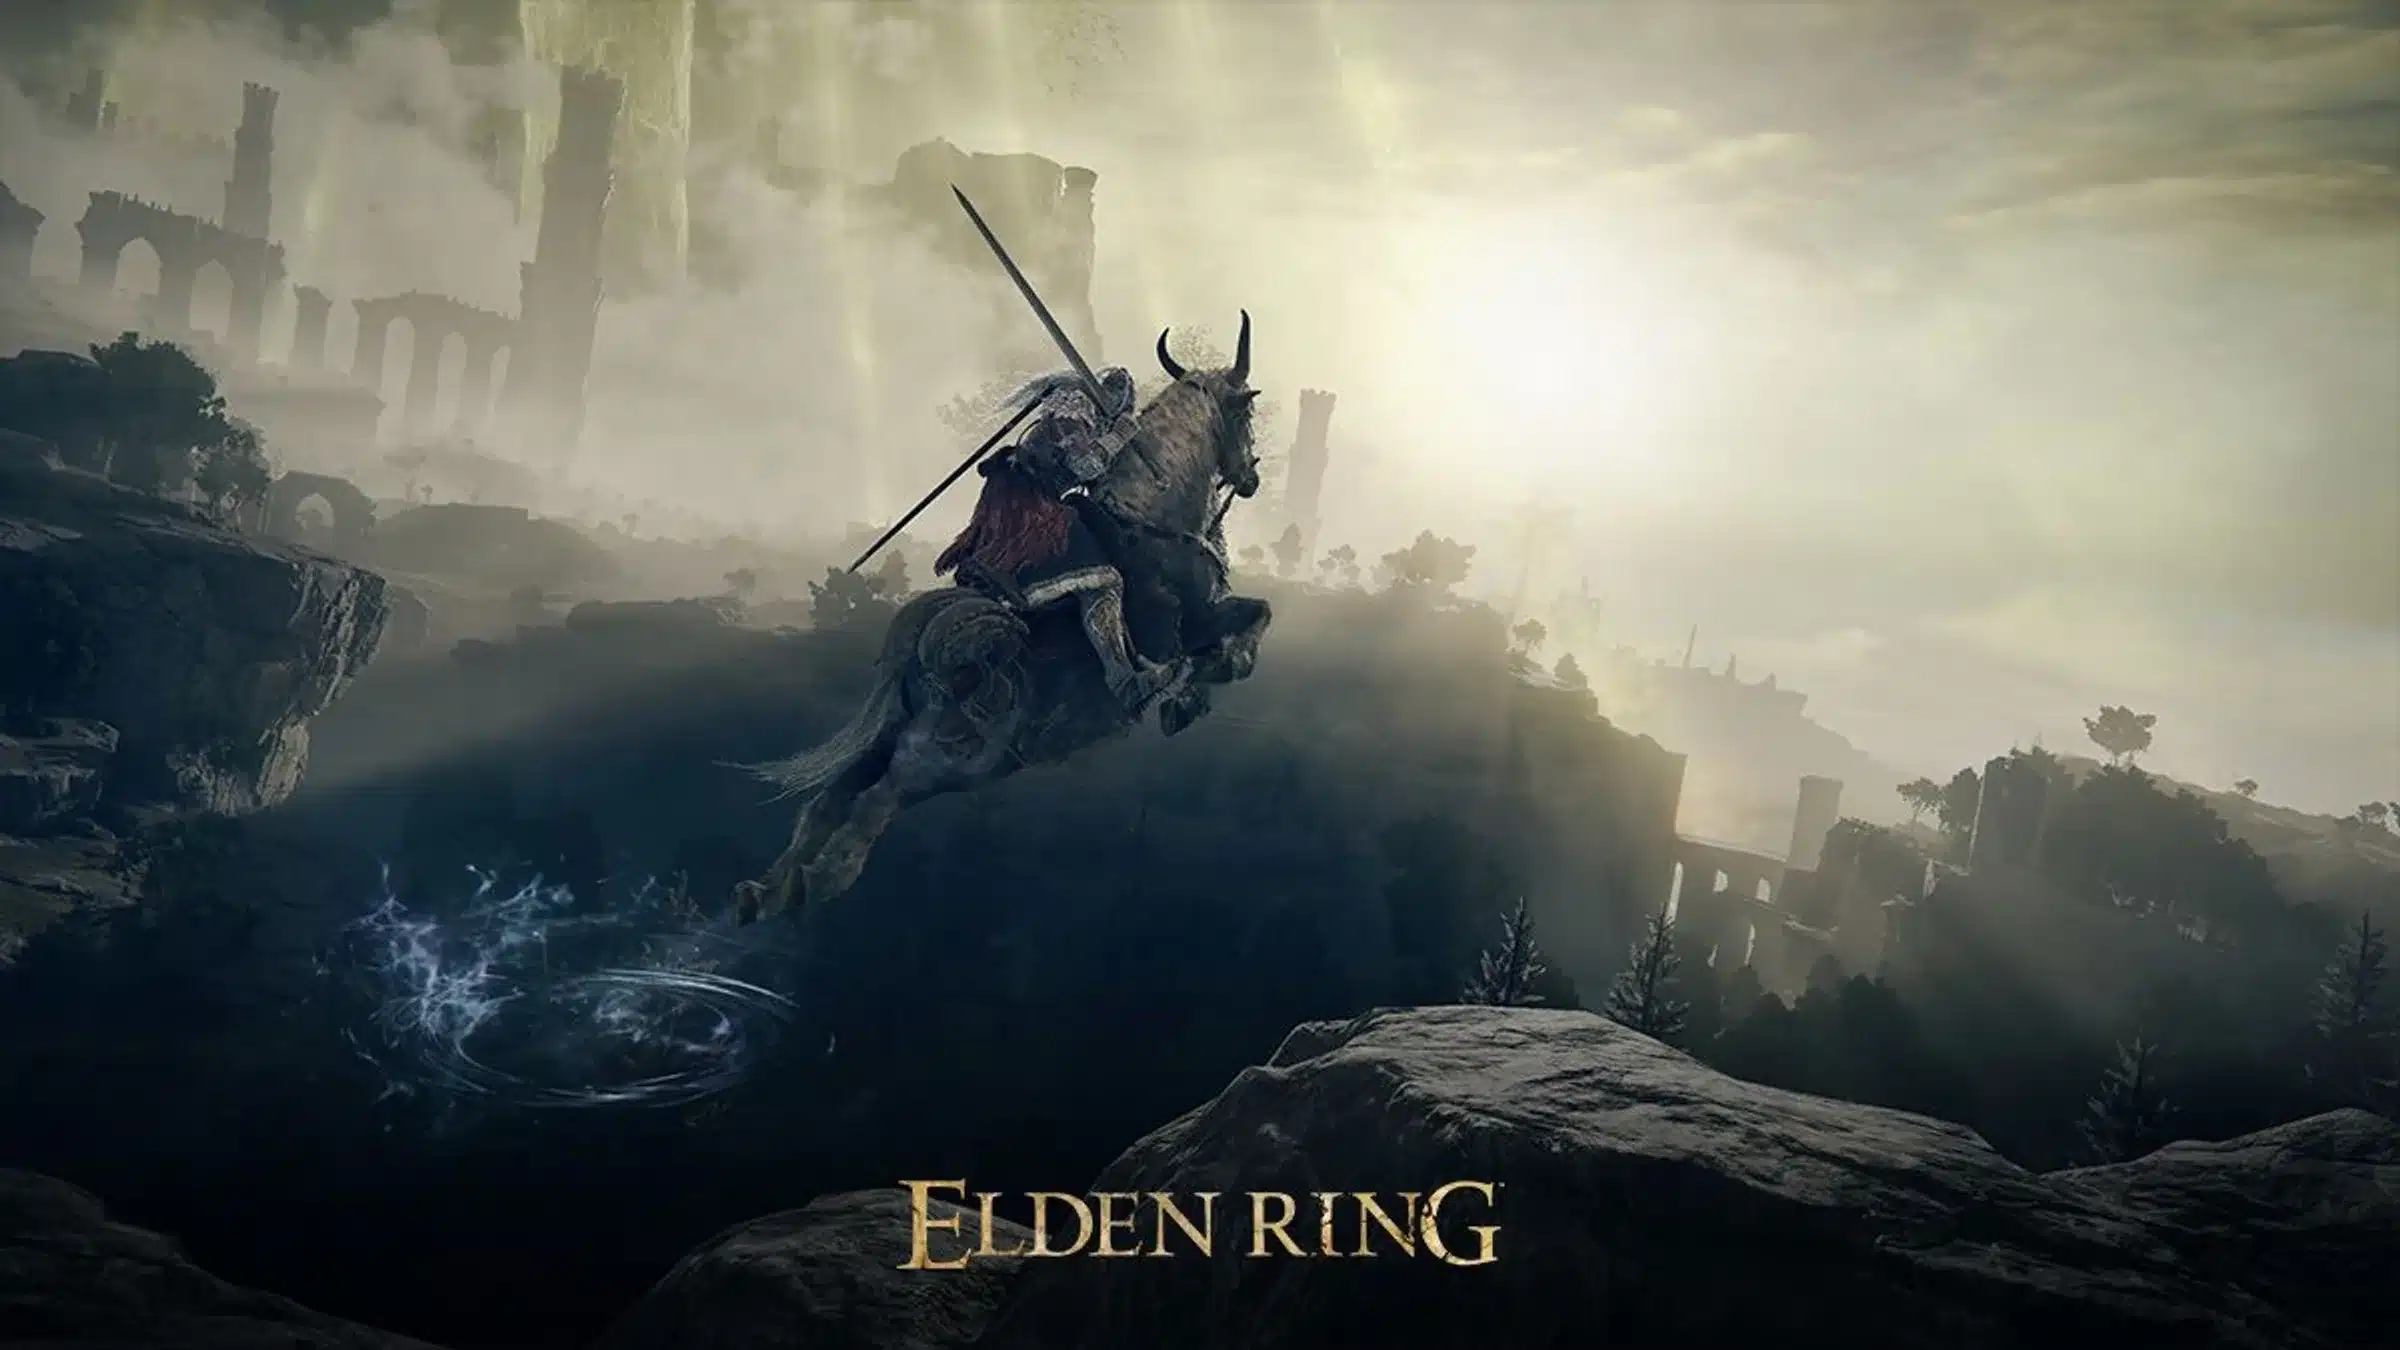 Elden Ring' endings guide: How to get all 6 we know of — so far